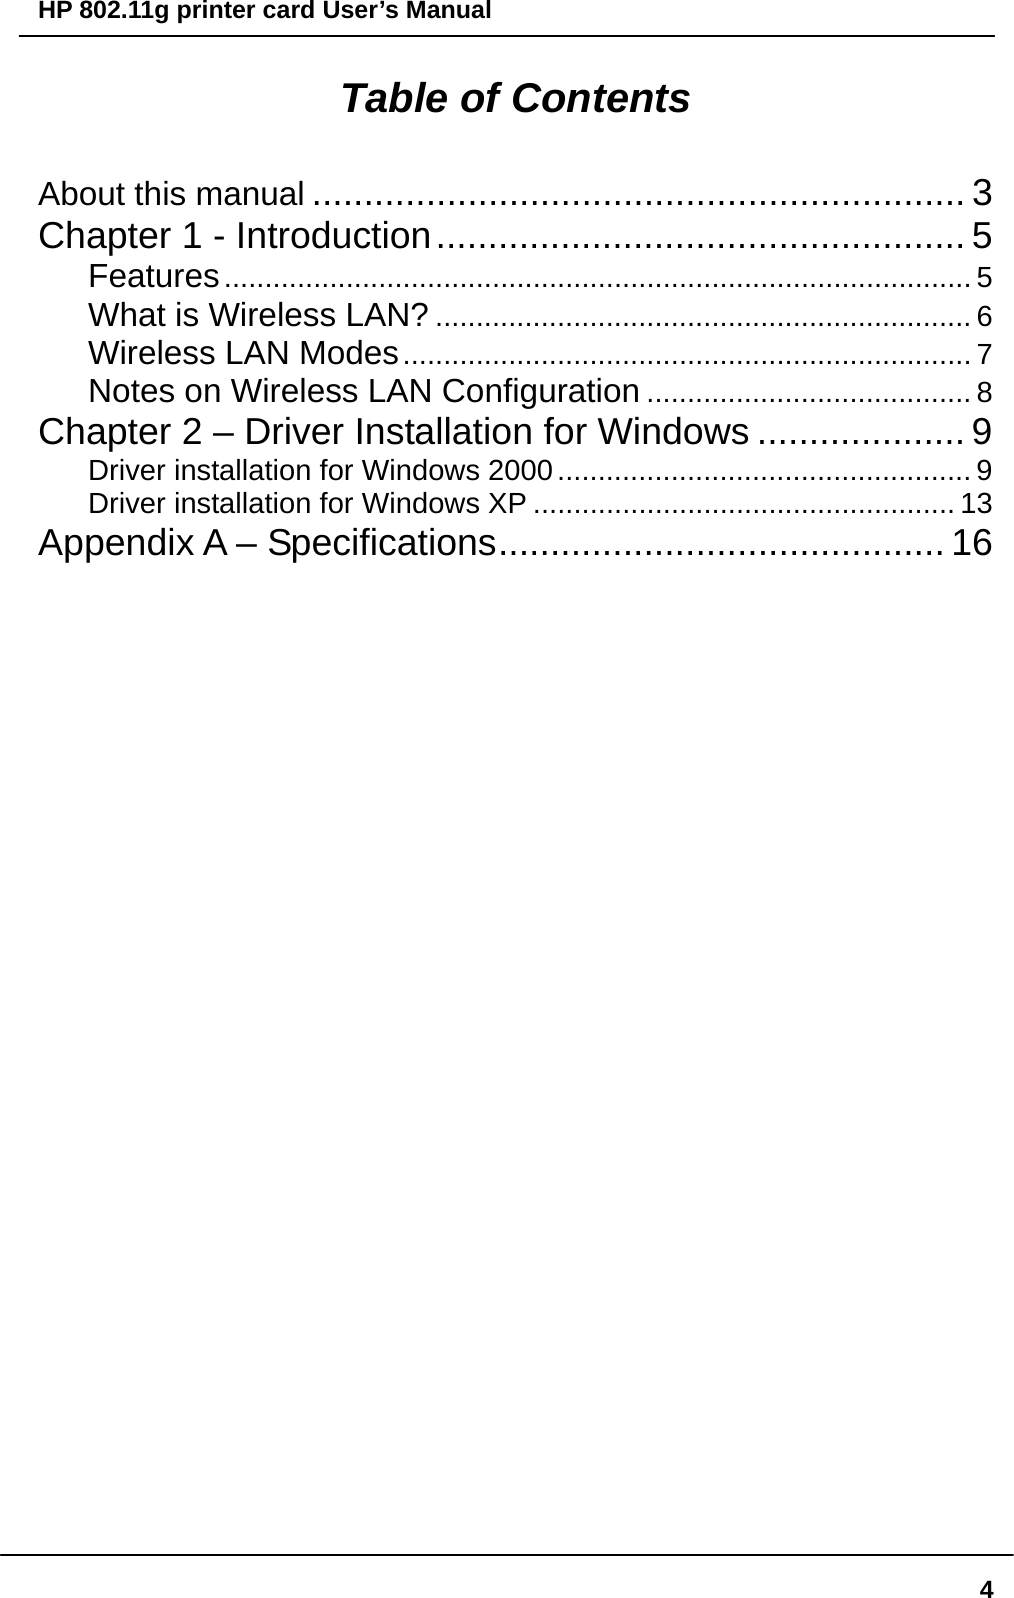 HP 802.11g printer card User’s Manual  4Table of Contents About this manual ............................................................... 3 Chapter 1 - Introduction................................................... 5 Features............................................................................................ 5 What is Wireless LAN? .................................................................. 6 Wireless LAN Modes...................................................................... 7 Notes on Wireless LAN Configuration ........................................ 8 Chapter 2 – Driver Installation for Windows .................... 9 Driver installation for Windows 2000................................................... 9 Driver installation for Windows XP .................................................... 13 Appendix A – Specifications........................................... 16                                   